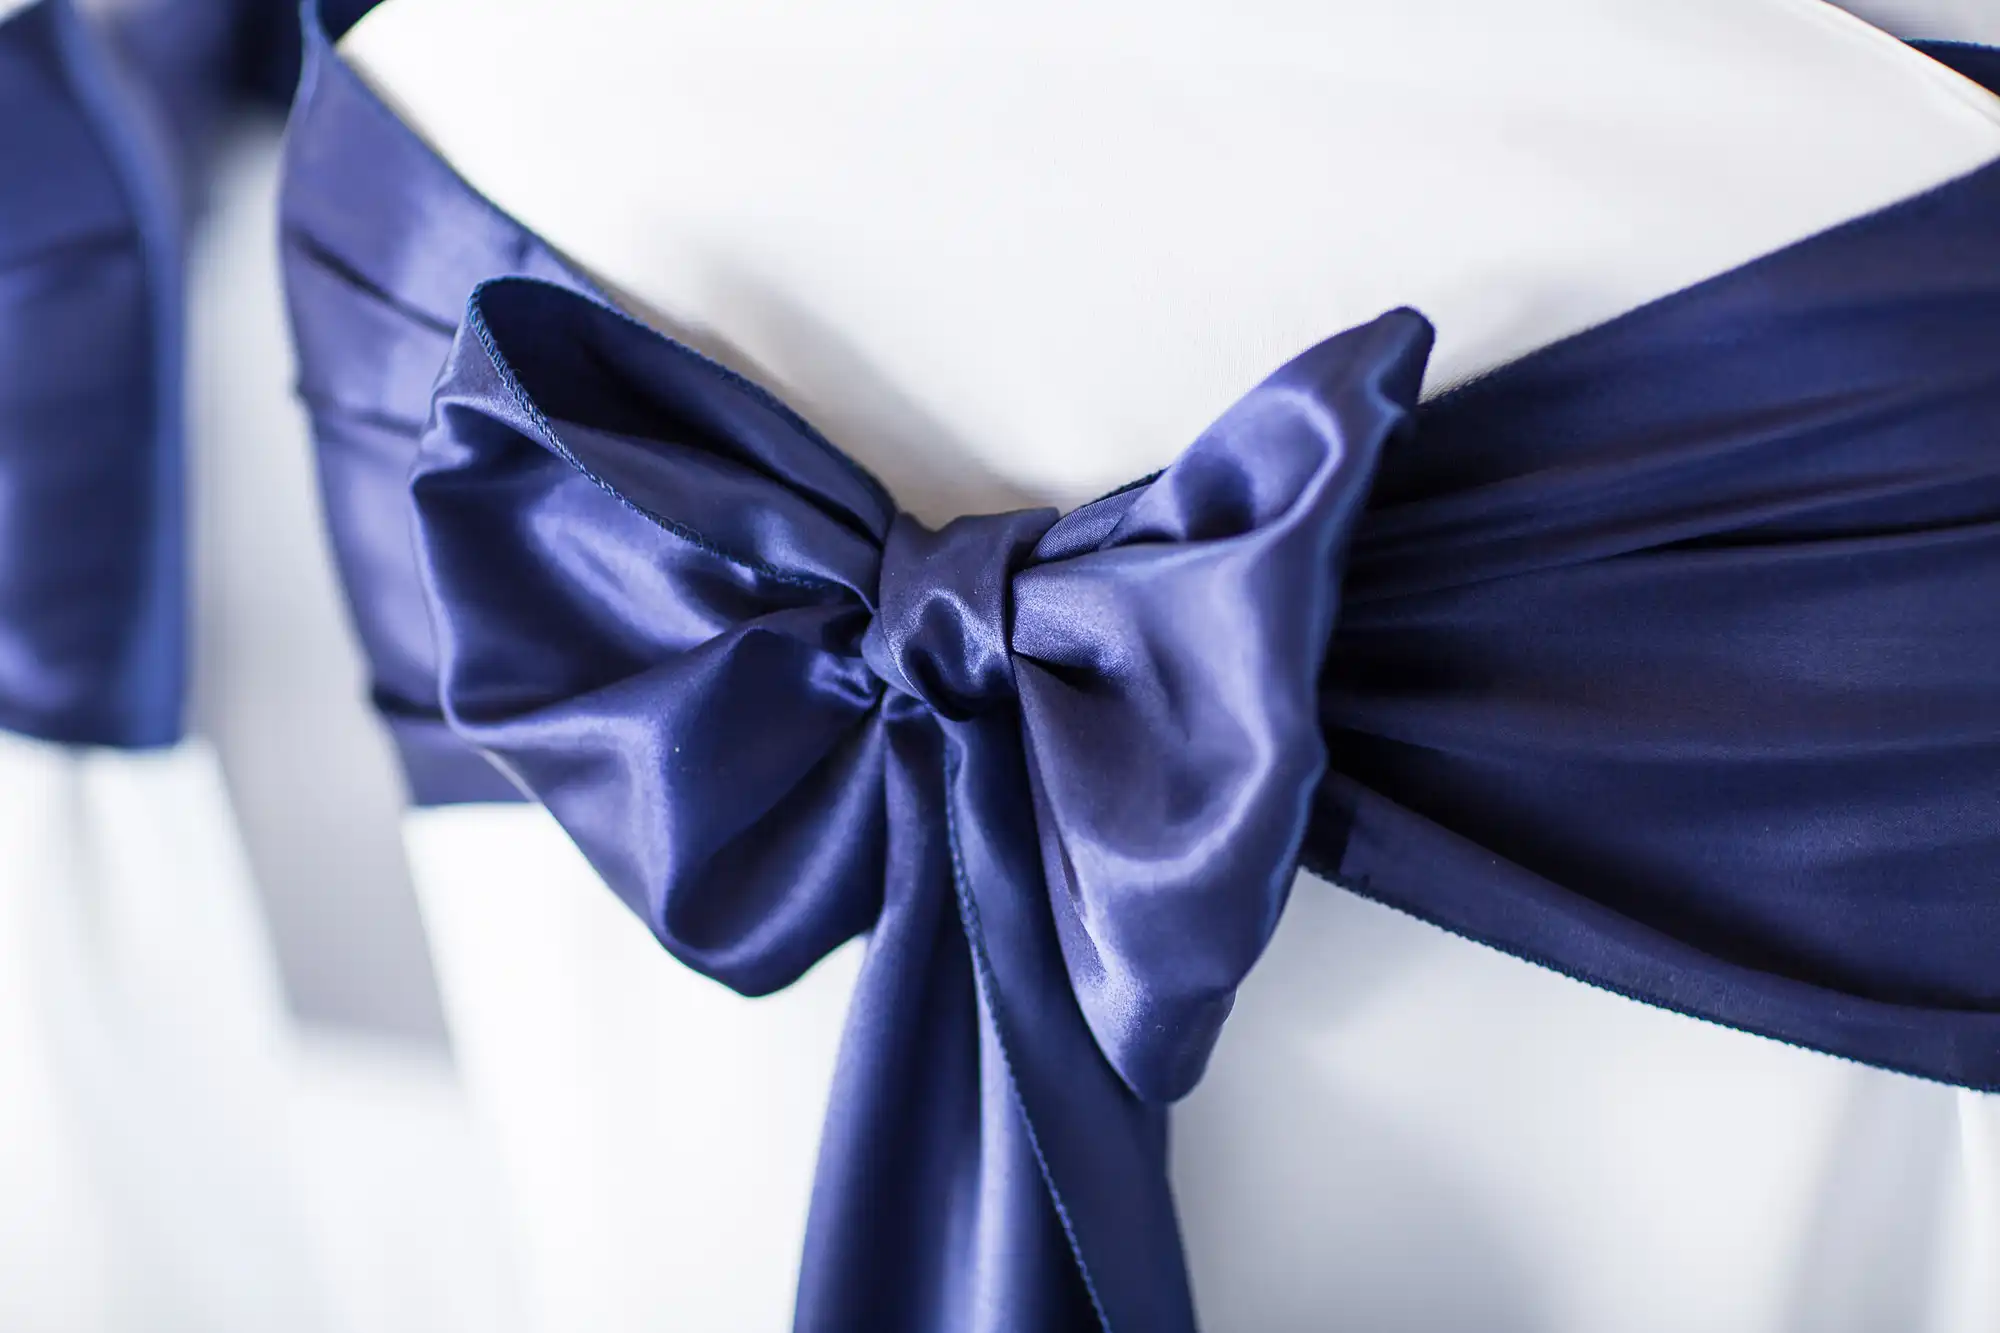 Close-up of a navy blue satin bow on a white chair cover, typically used for elegant event decorations.